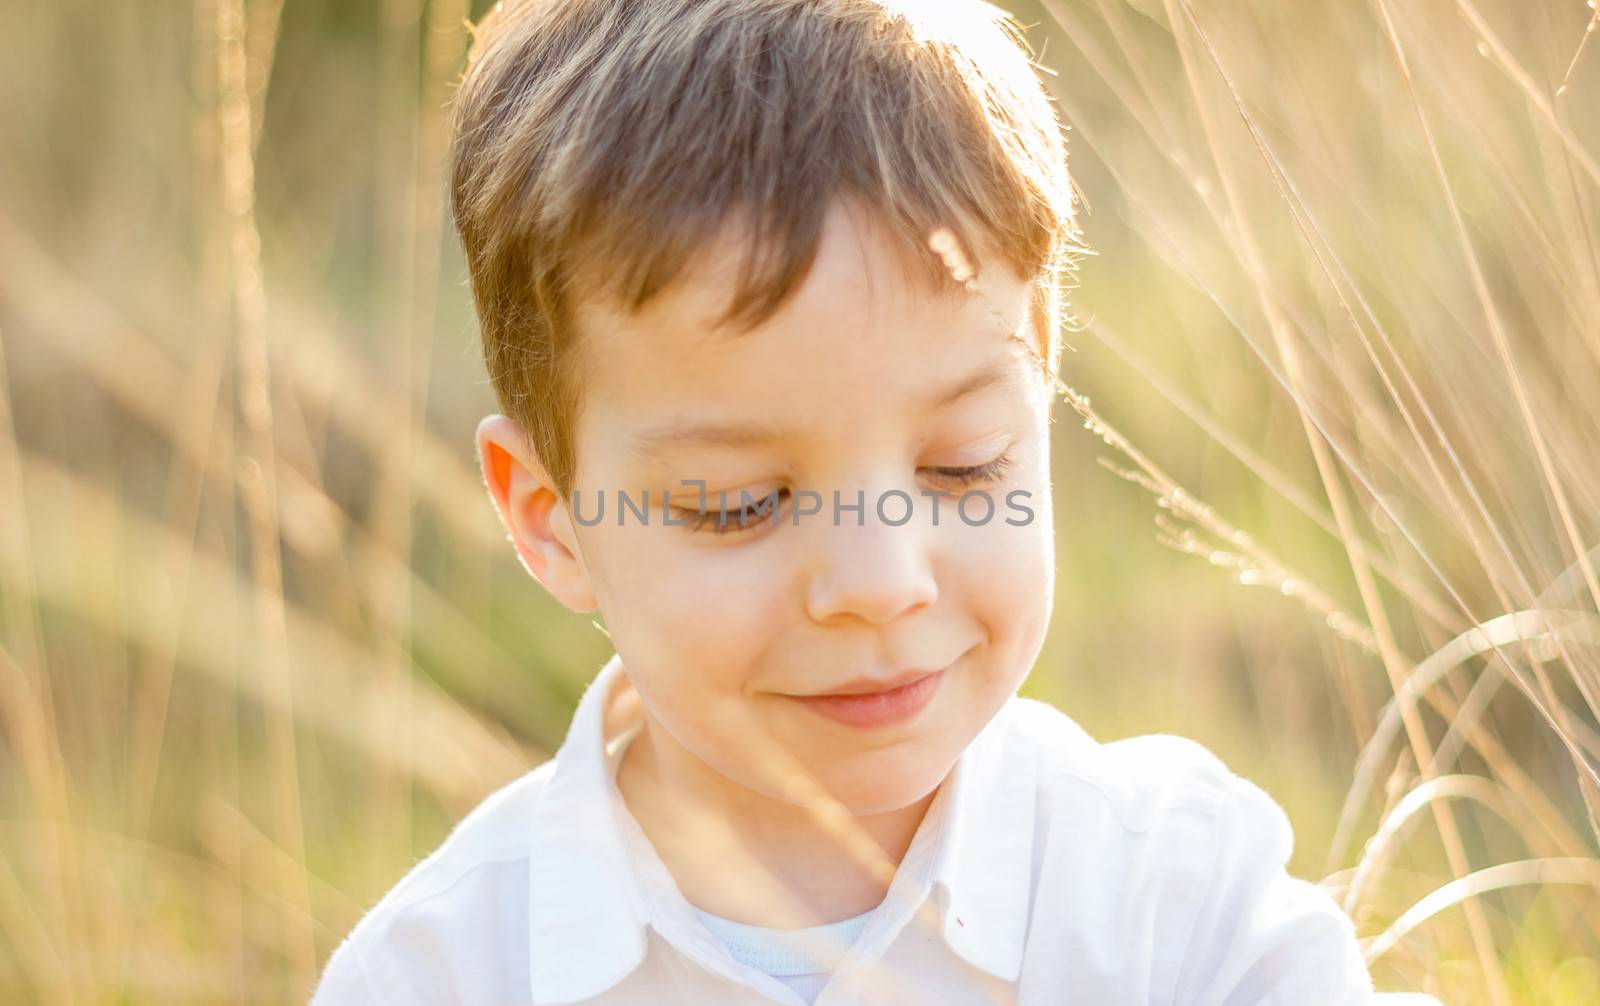 Kid in field playing with spikes at summer sunset by doble.d